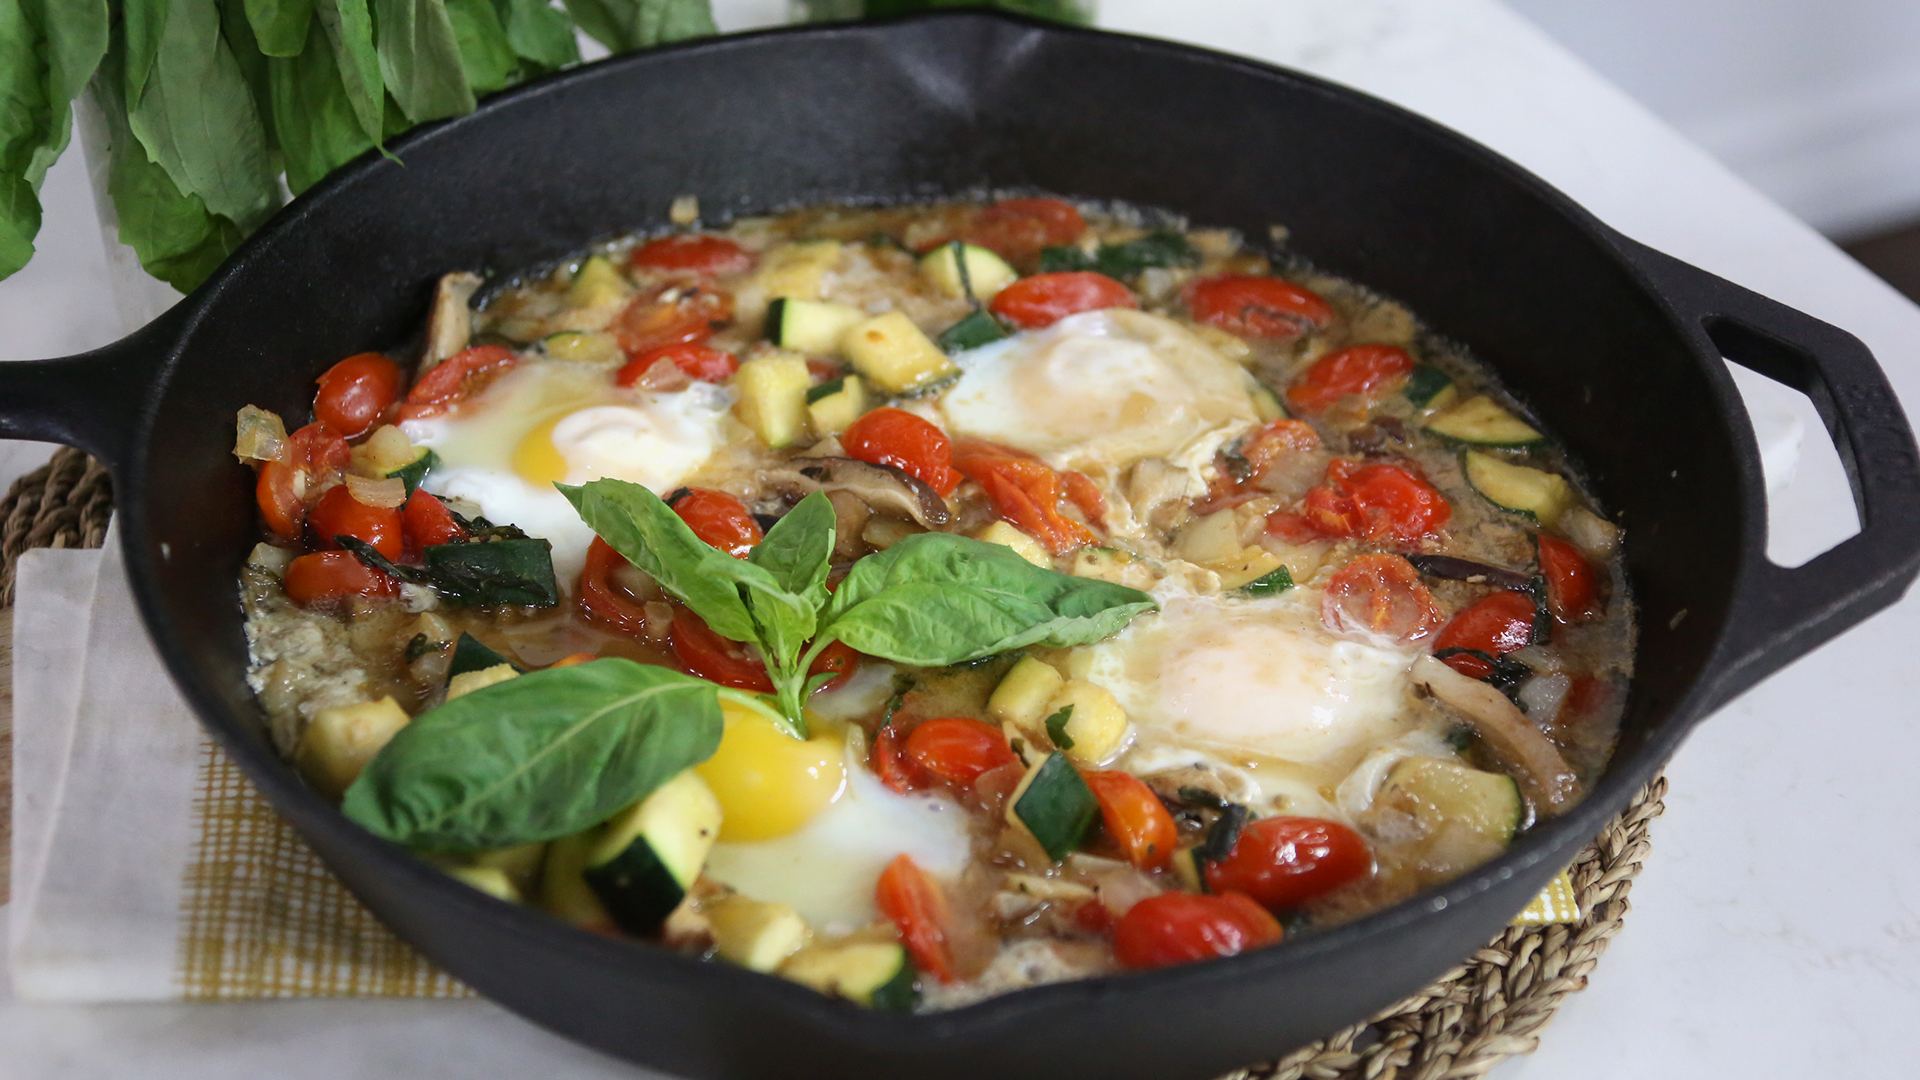 Skillet poached eggs and vegetables